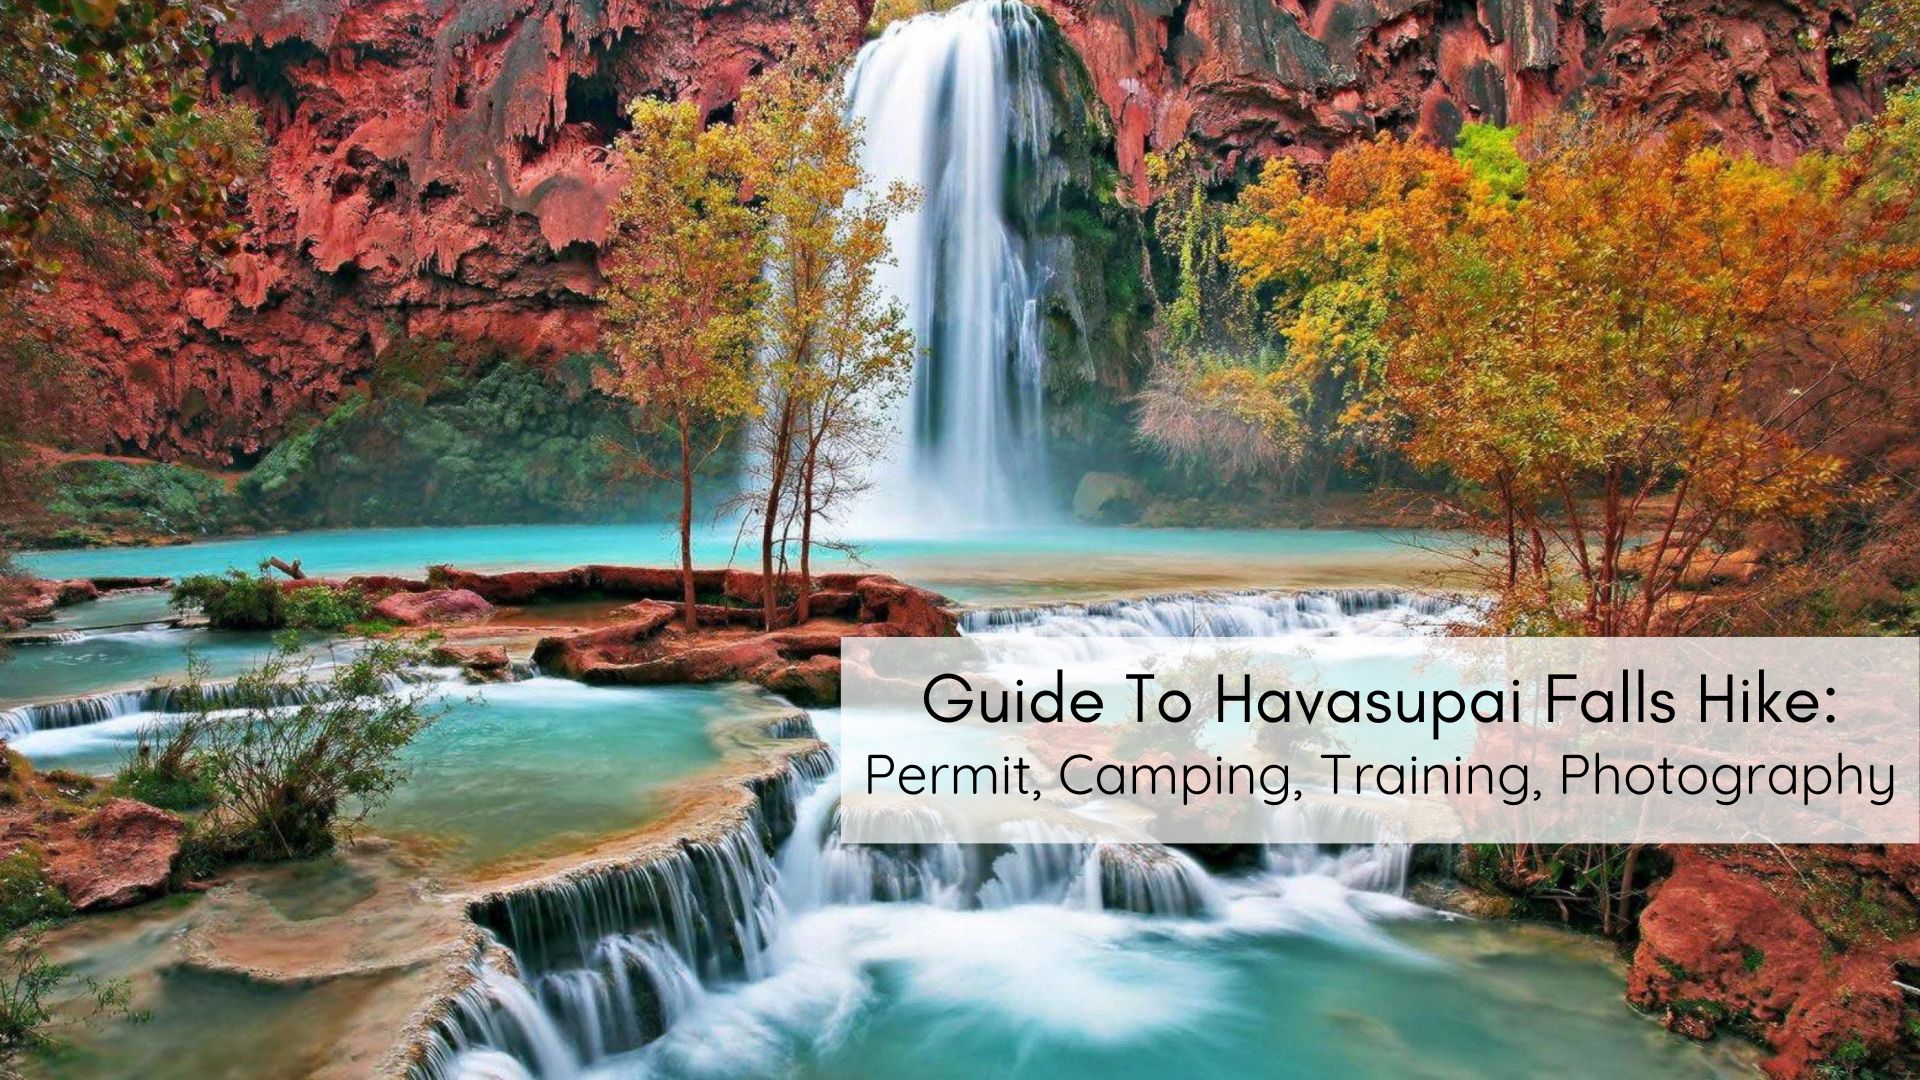 Guide To Havasupai Falls Hike Permit, Camping, Training, Photography